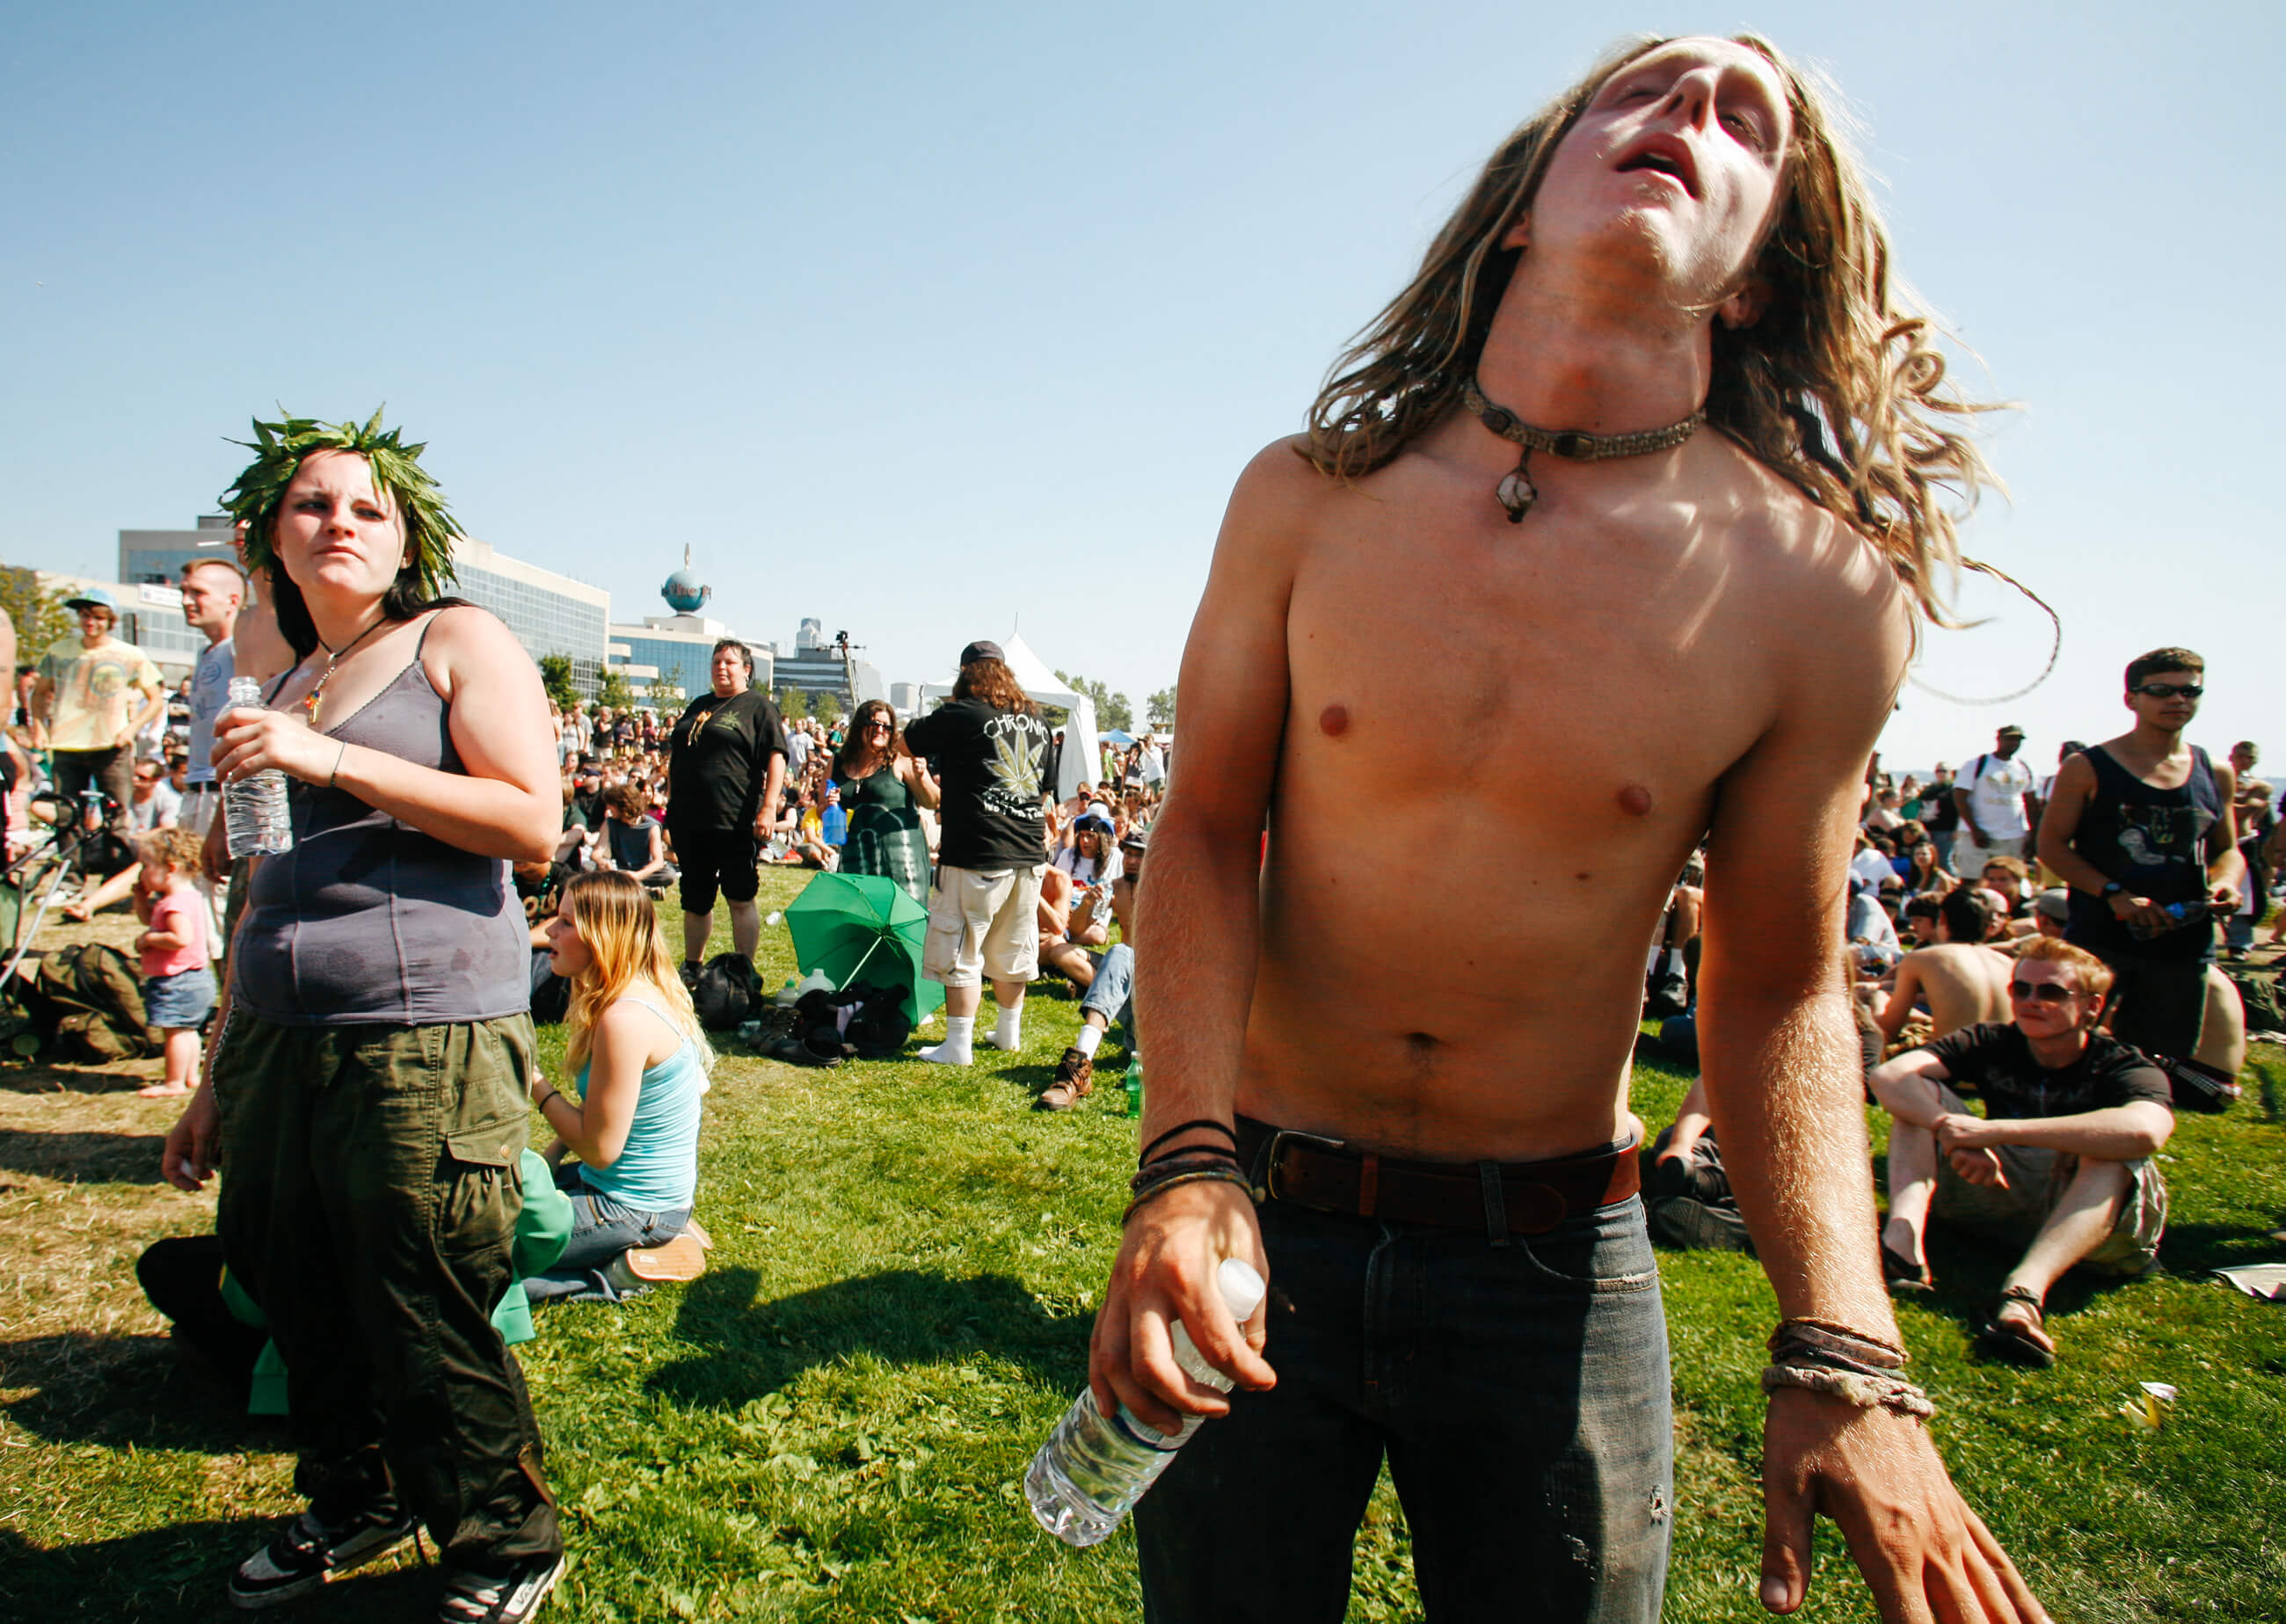 A shirtless man with long hair dances during a musical performance at Hempfest in Seattle Washington